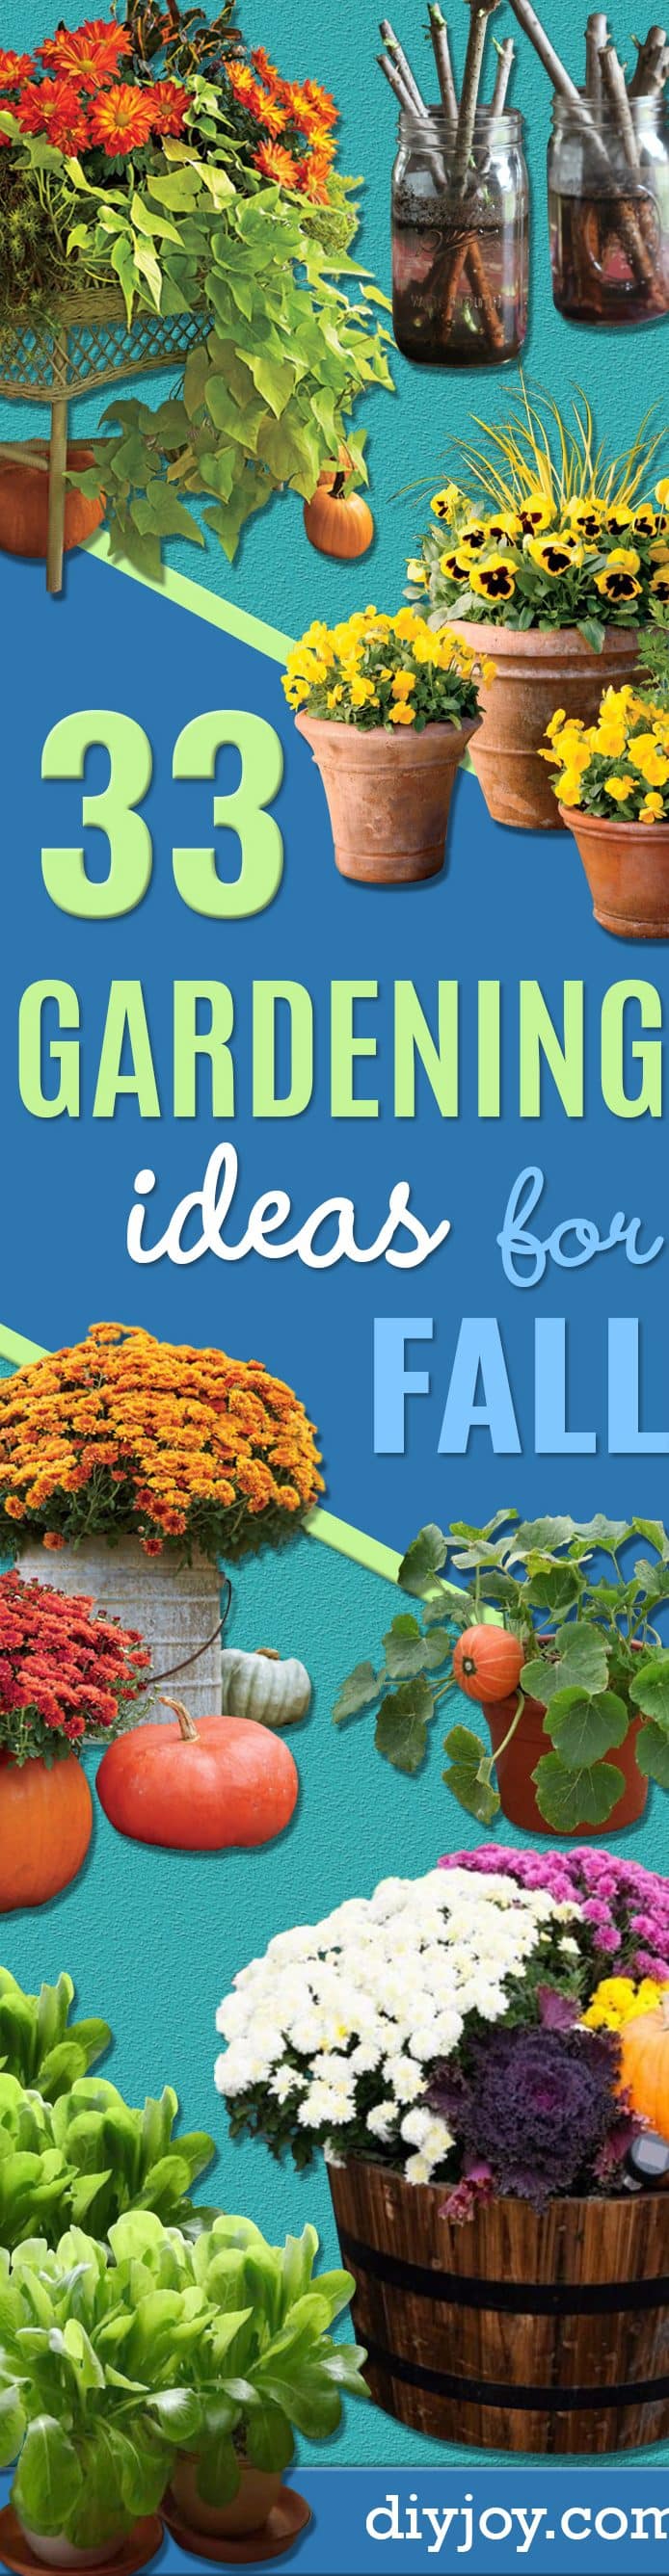 Best Gardening Ideas for Fall - Cool DIY Garden Ideas for Planting Autumn Varieties of Flowers and Vegetables - Pumpkins, Container Gardens, Planting Tips, Herbs and Easy Ideas for Beginners 